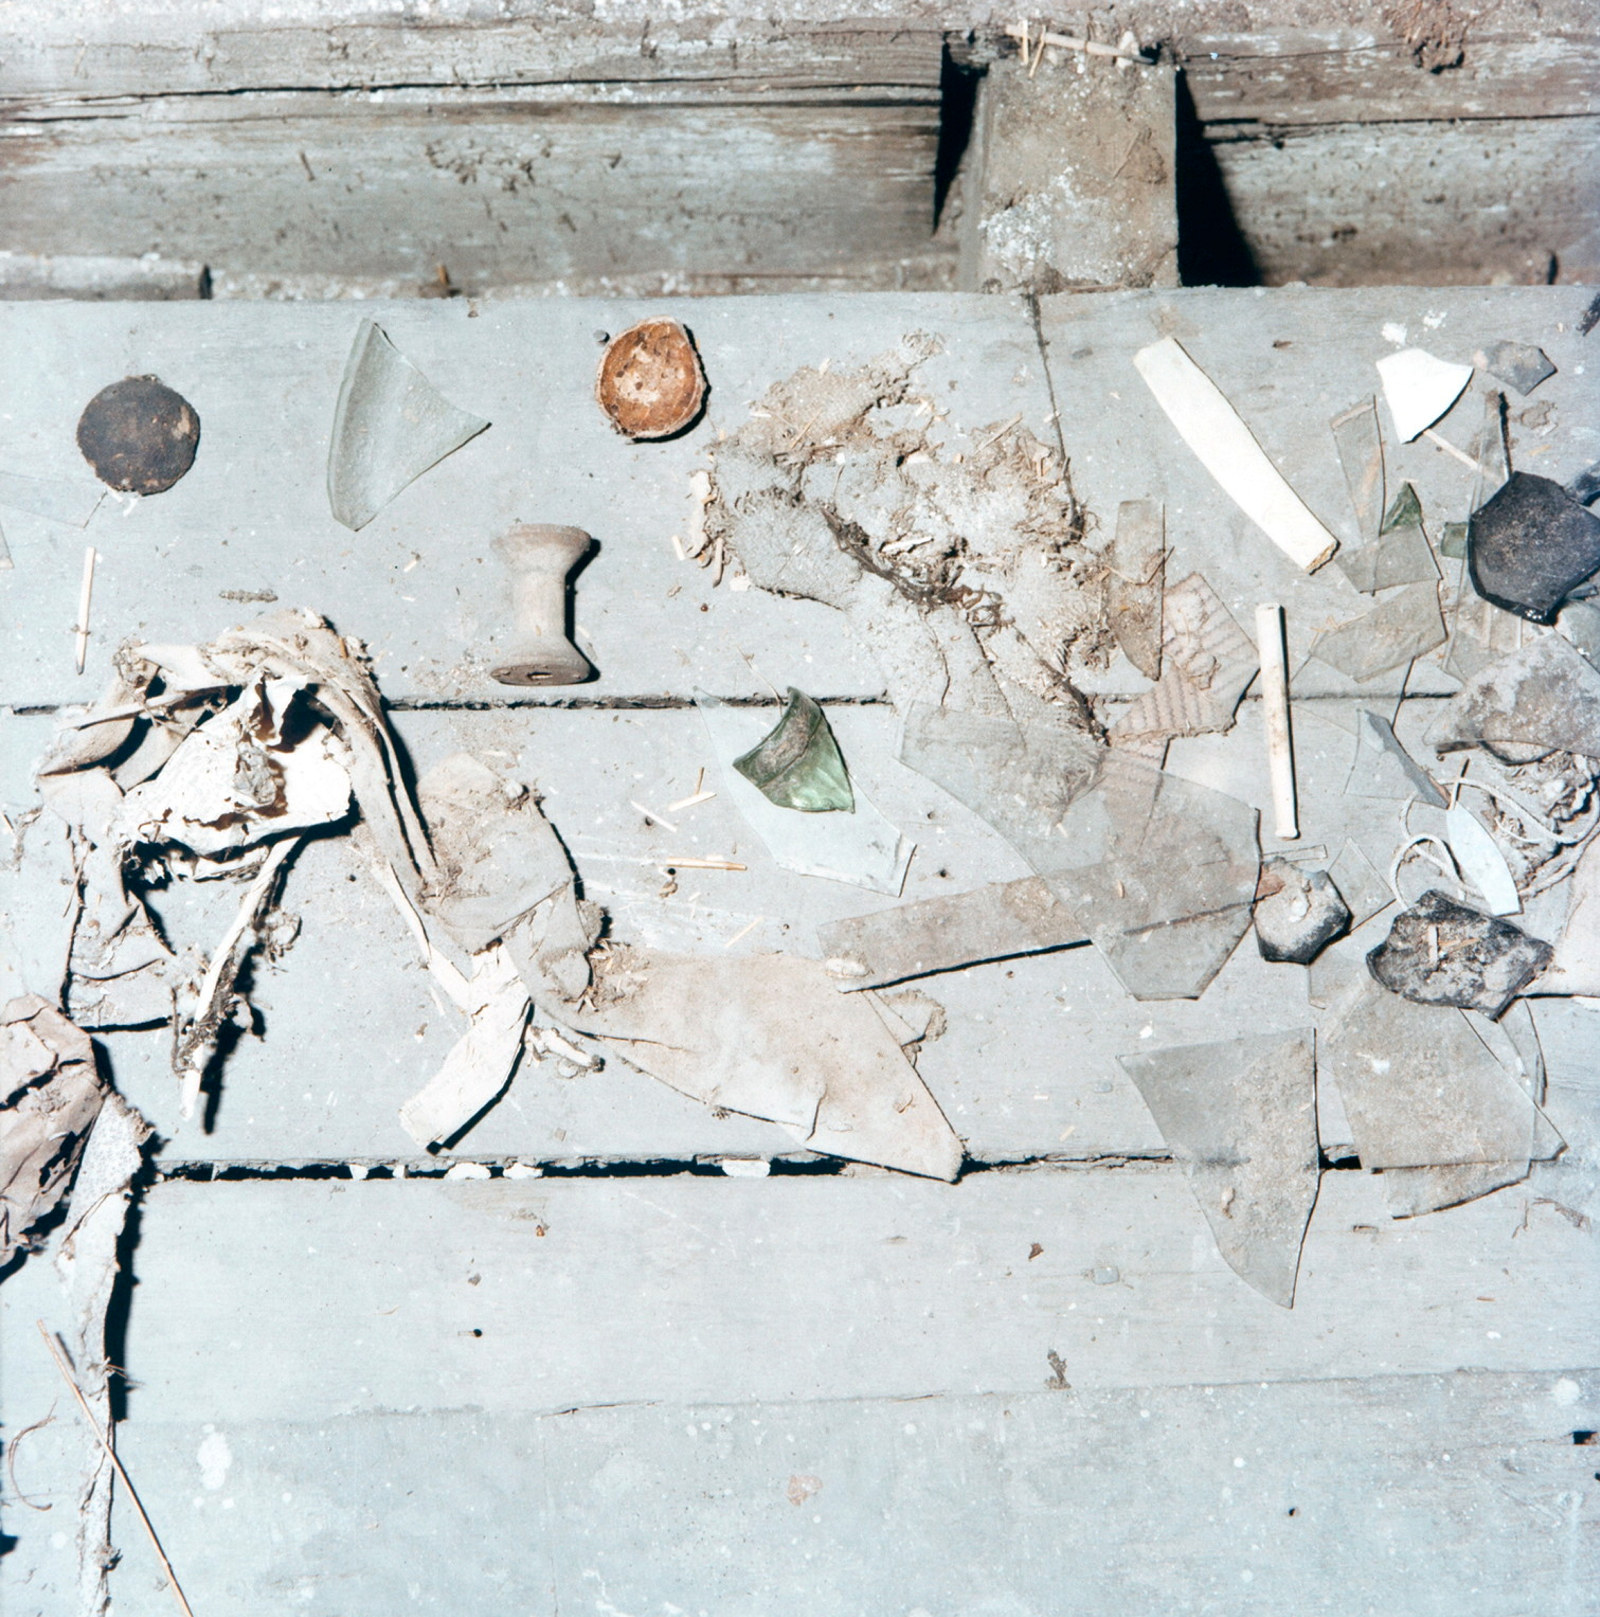 Collection of items on floorboards.